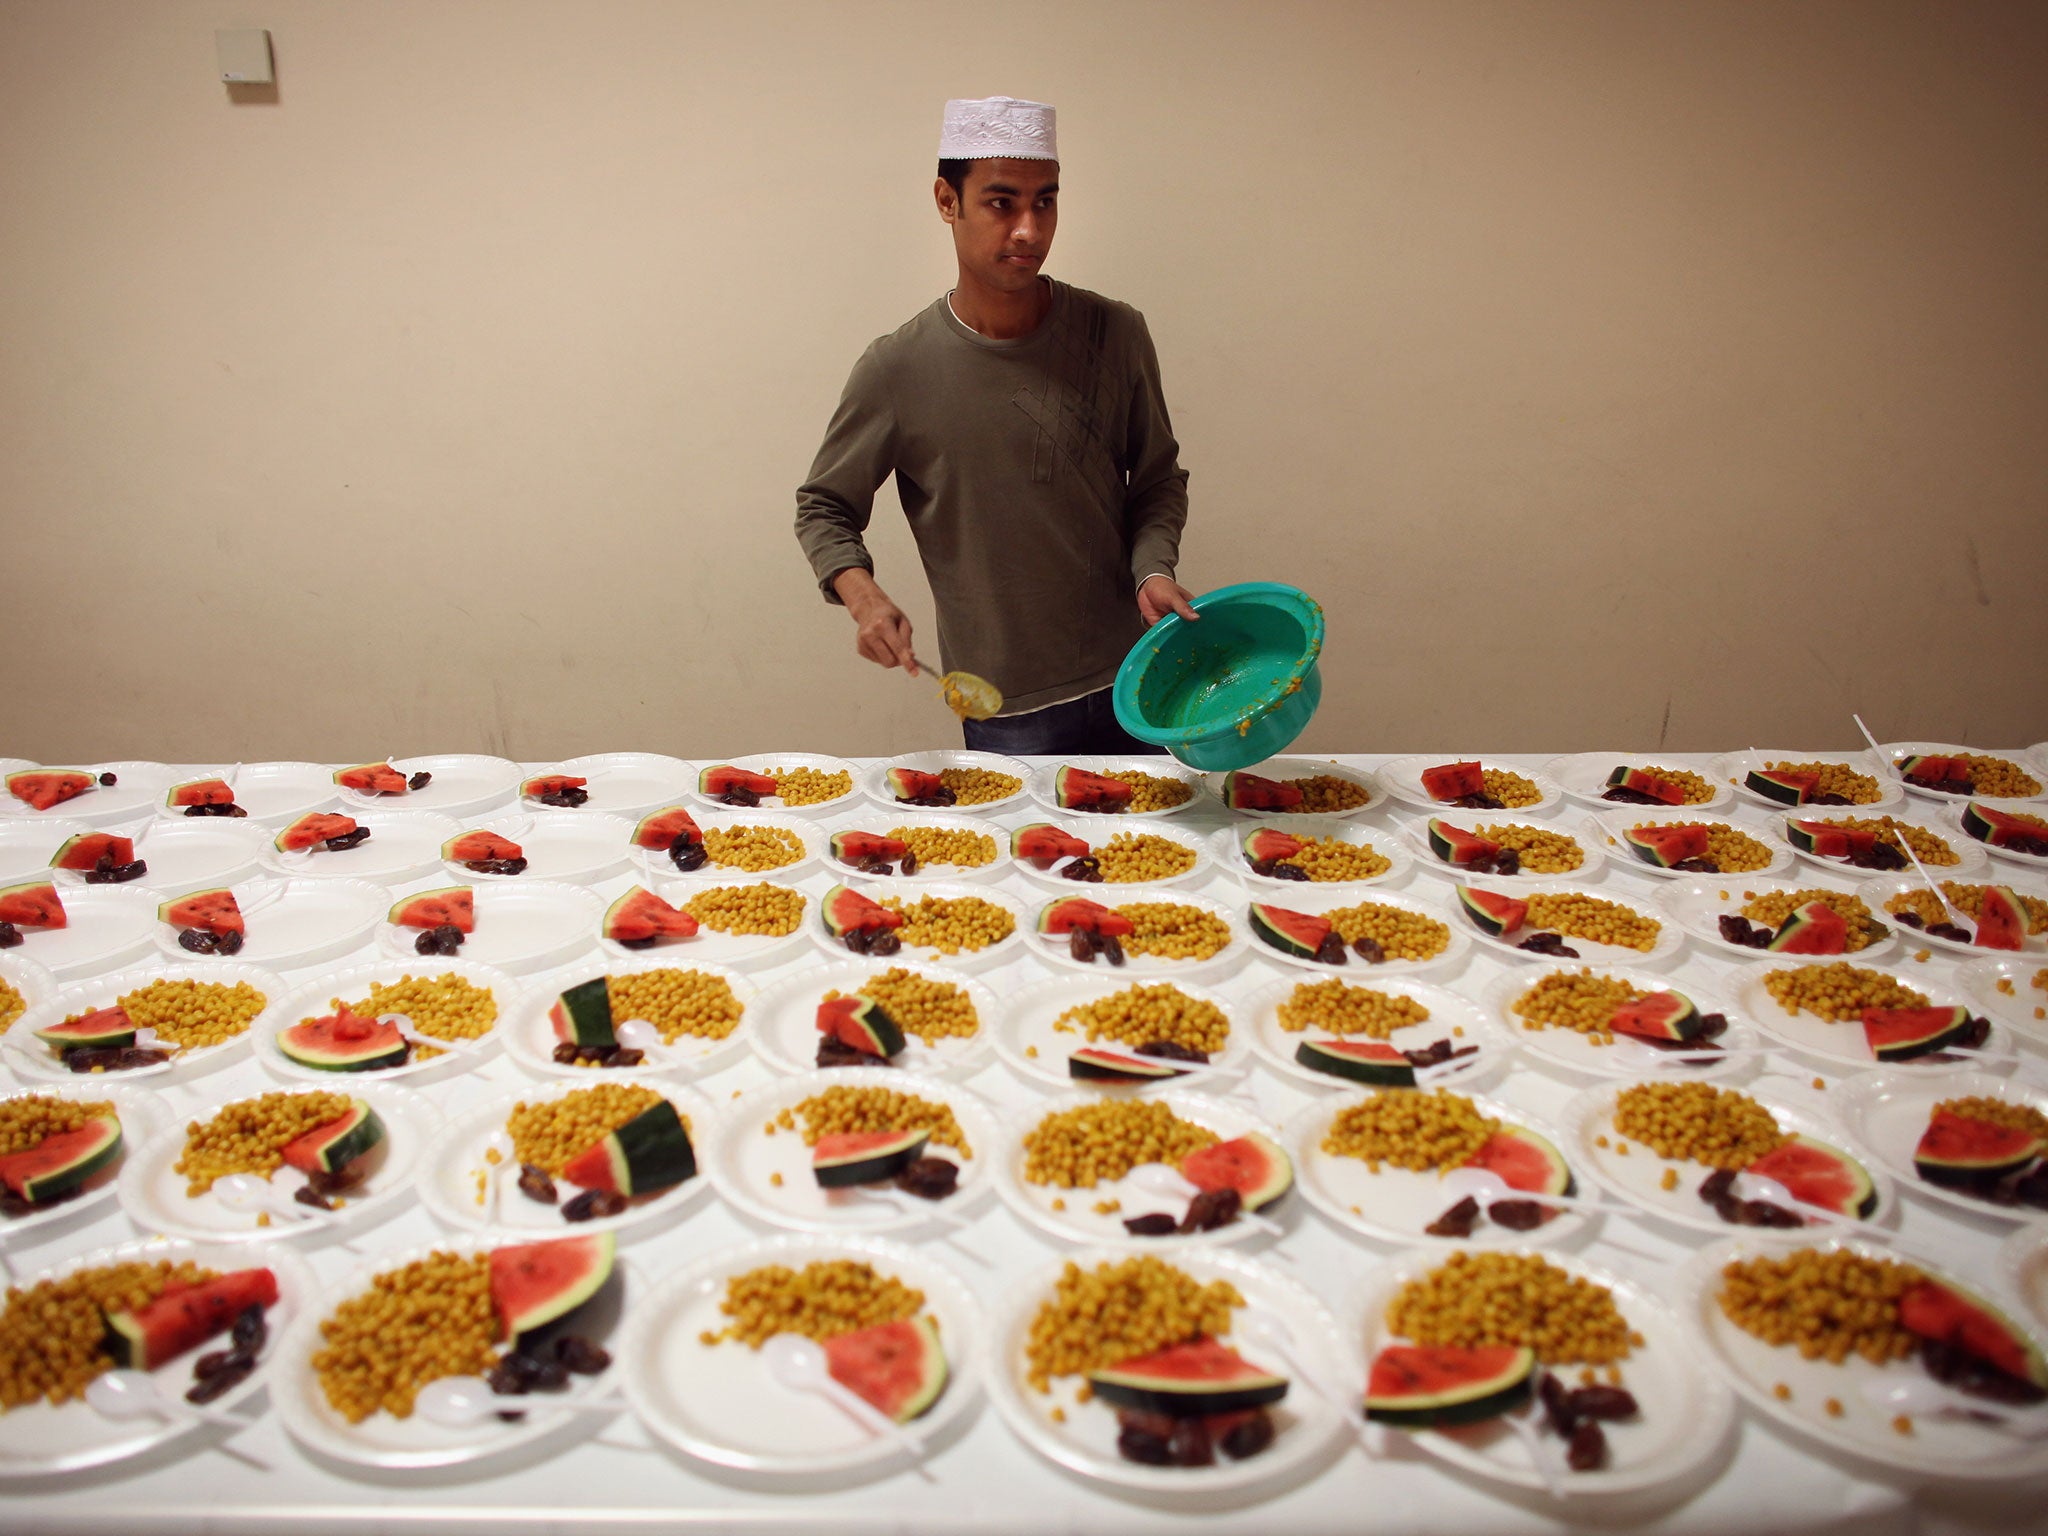 A young man serves food for Iftar, the evening meal during the Muslim holy month of Ramadan, at the London Muslim Centre (Image: Getty)